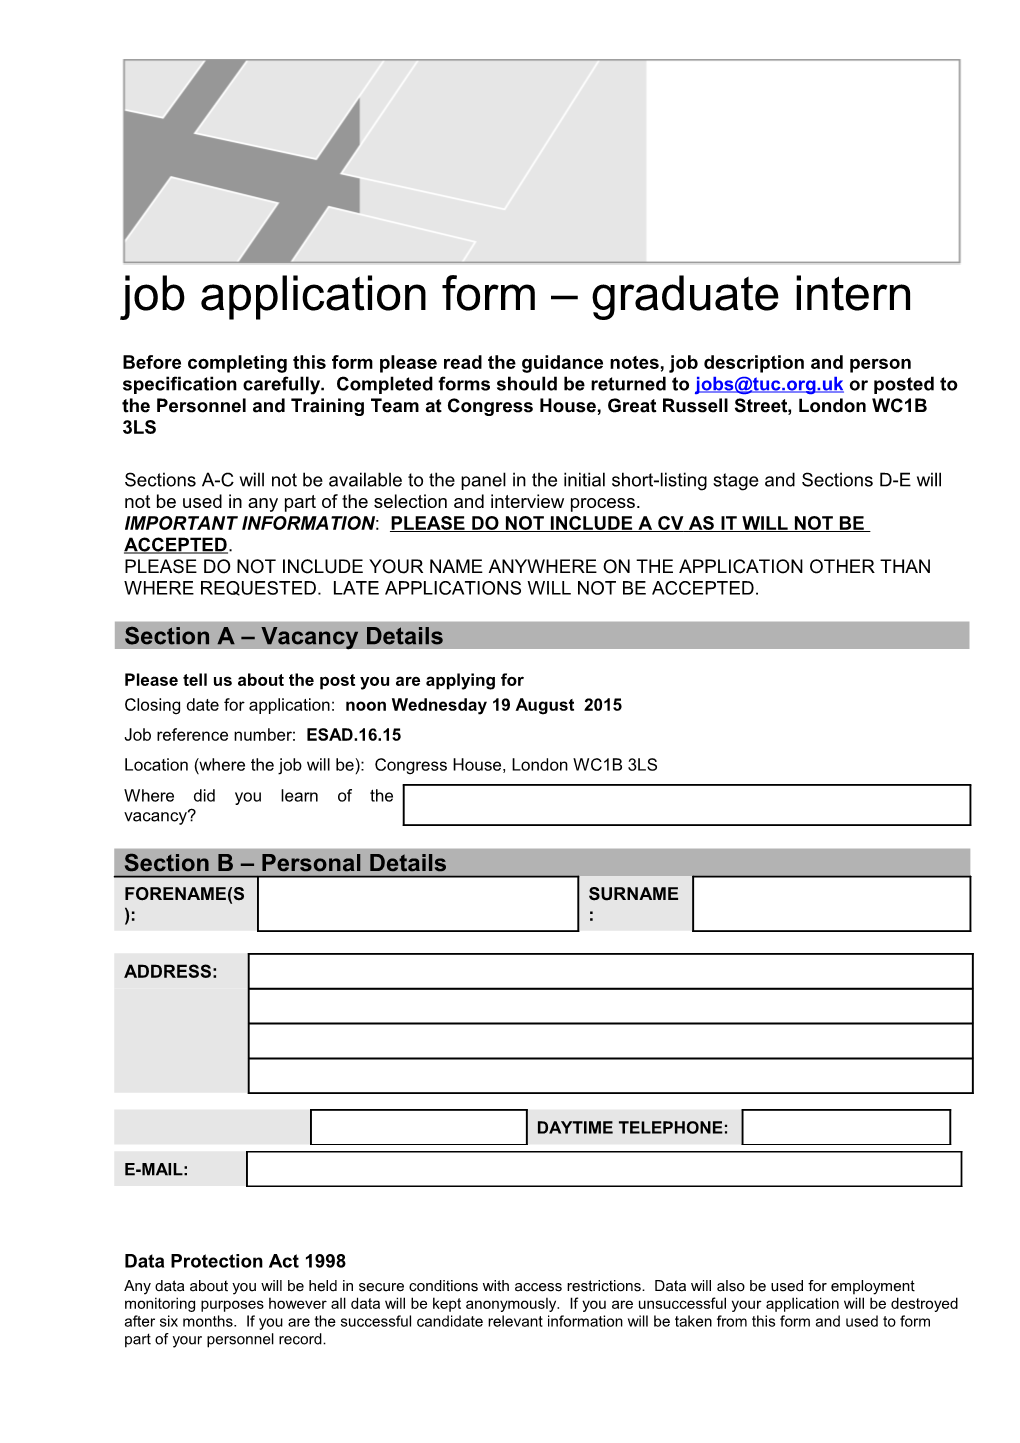 Before Completing This Form Please Read the Guidance Notes, Job Description and Person